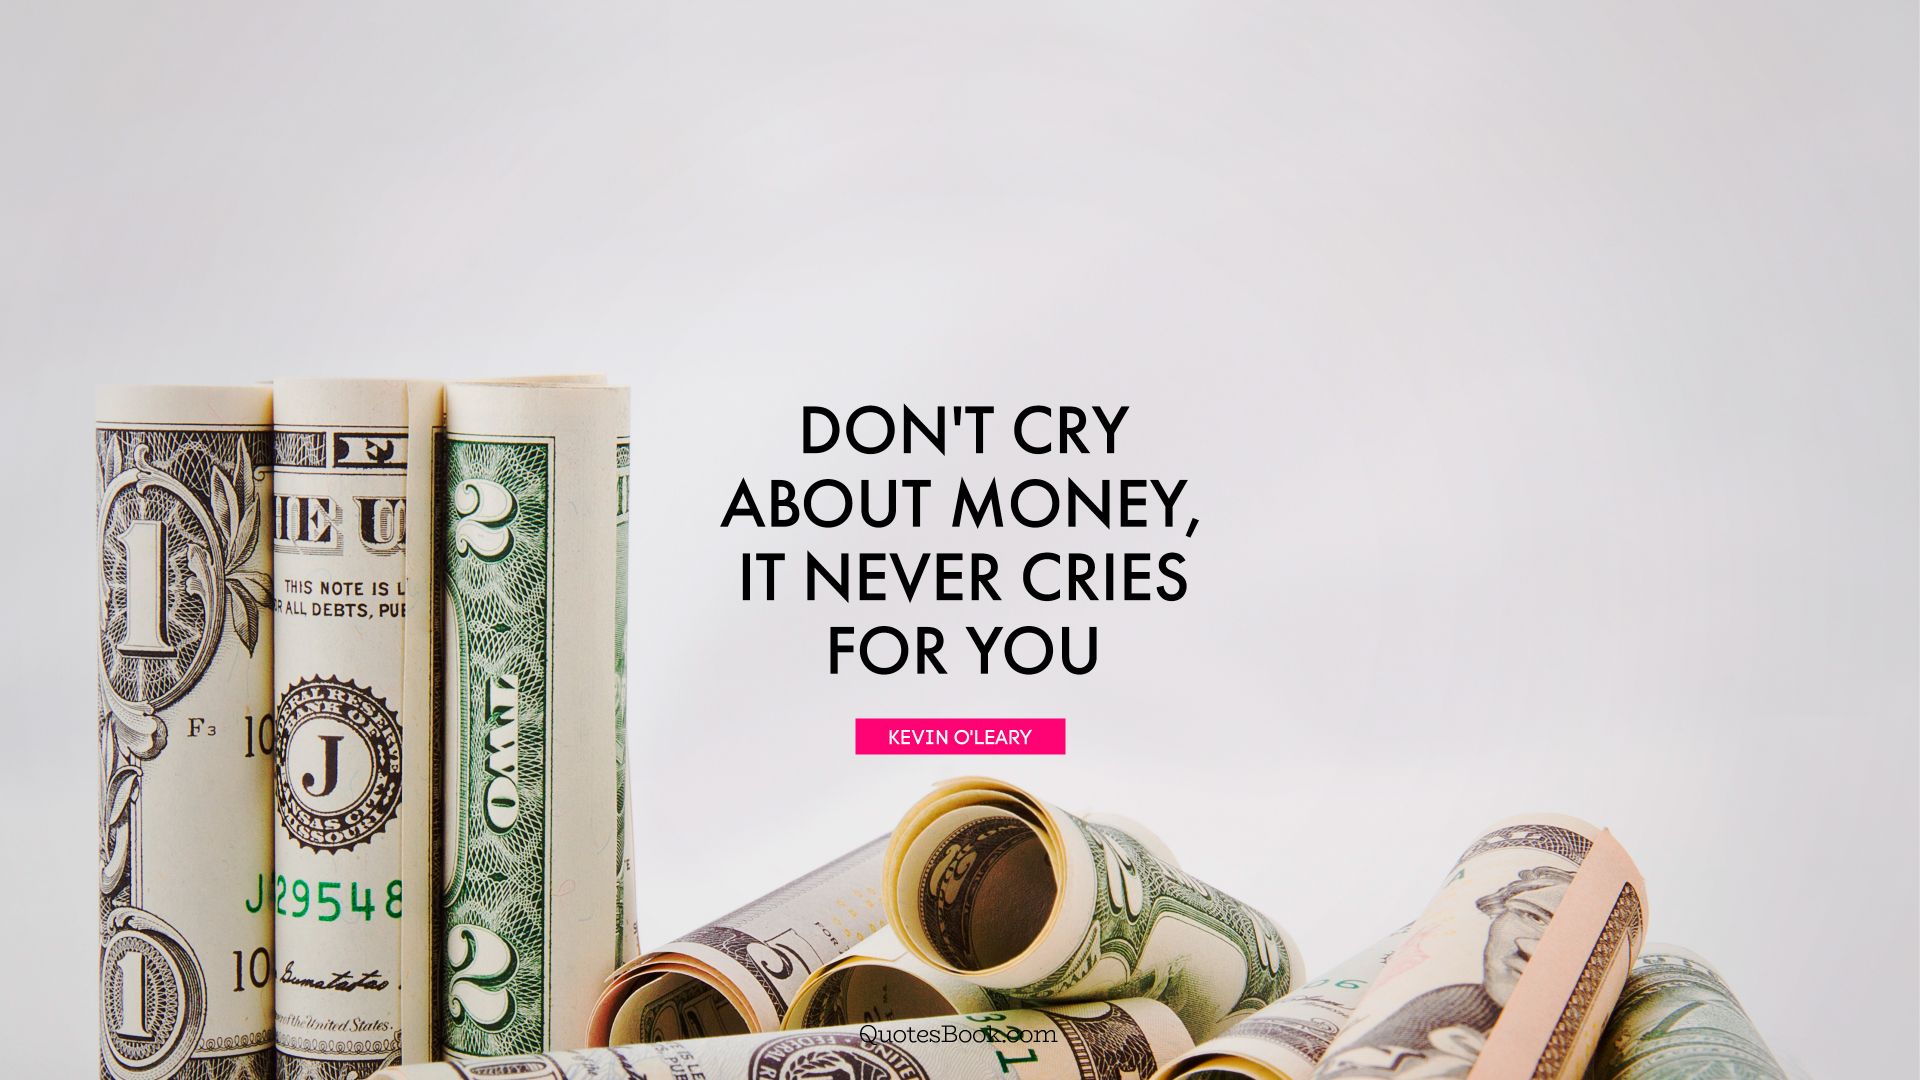 Don't cry about money, it never cries for you. - Quote by Kevin O'Leary